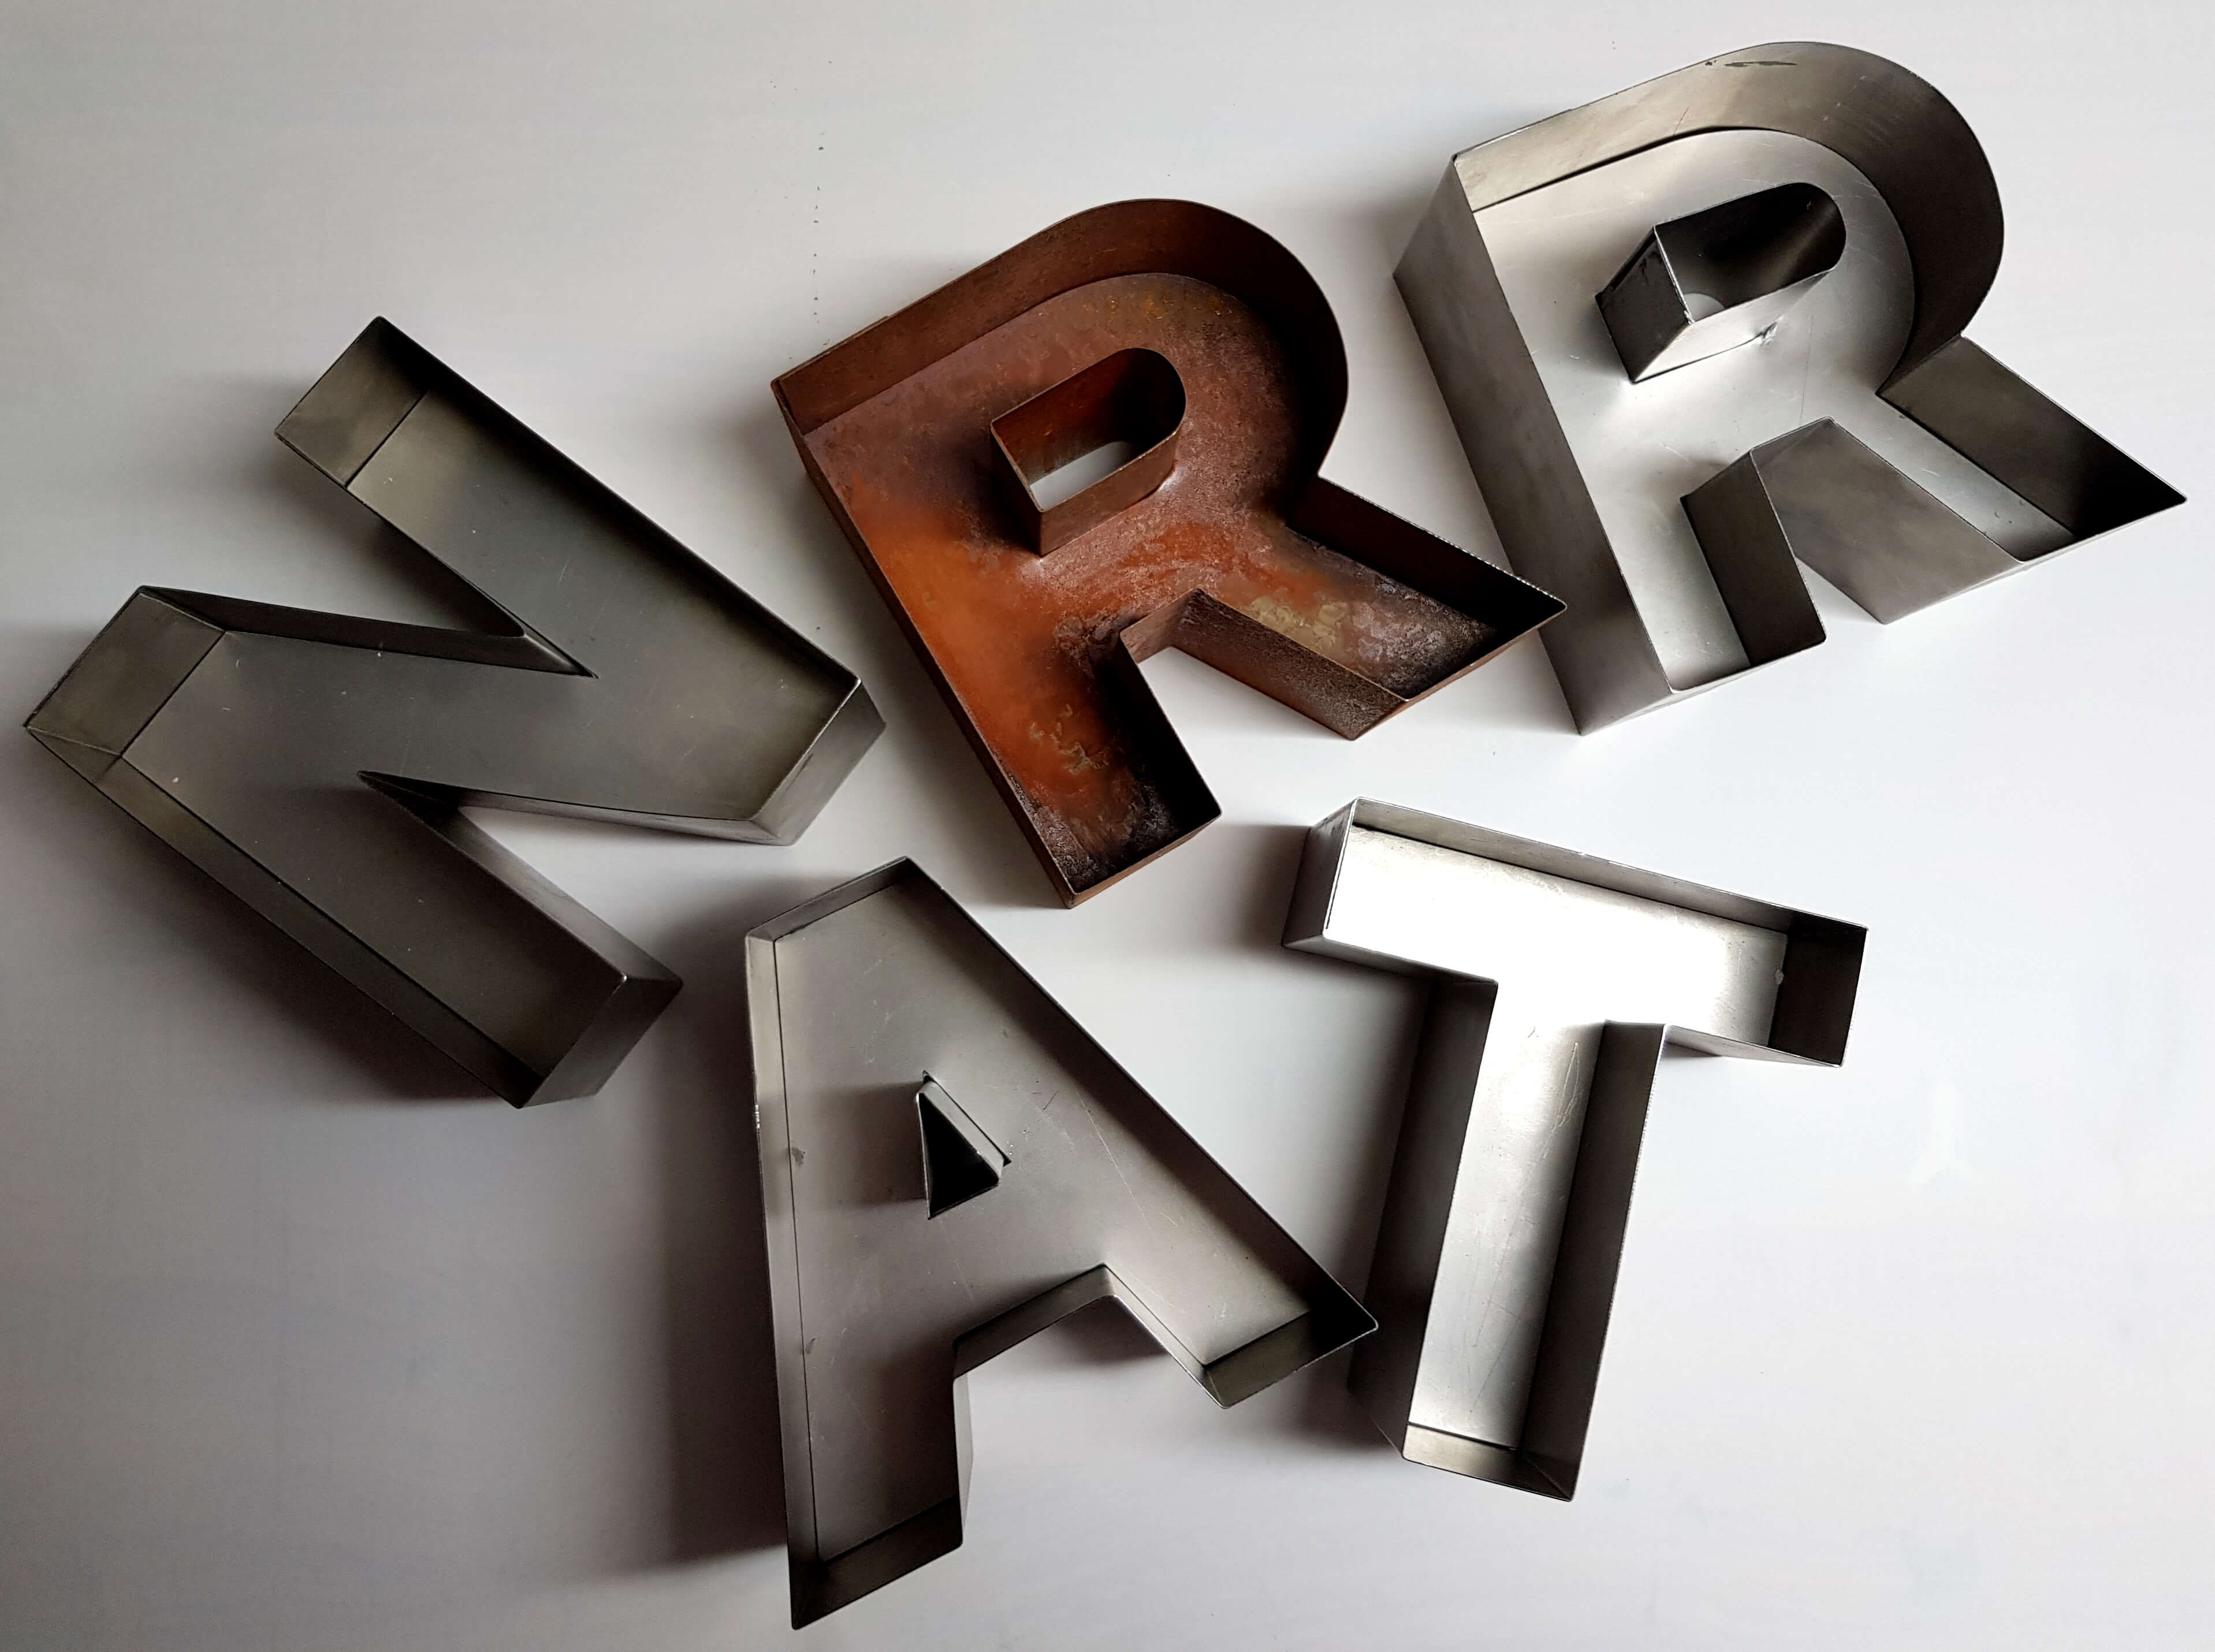 Rusty sheet metal and metal letters